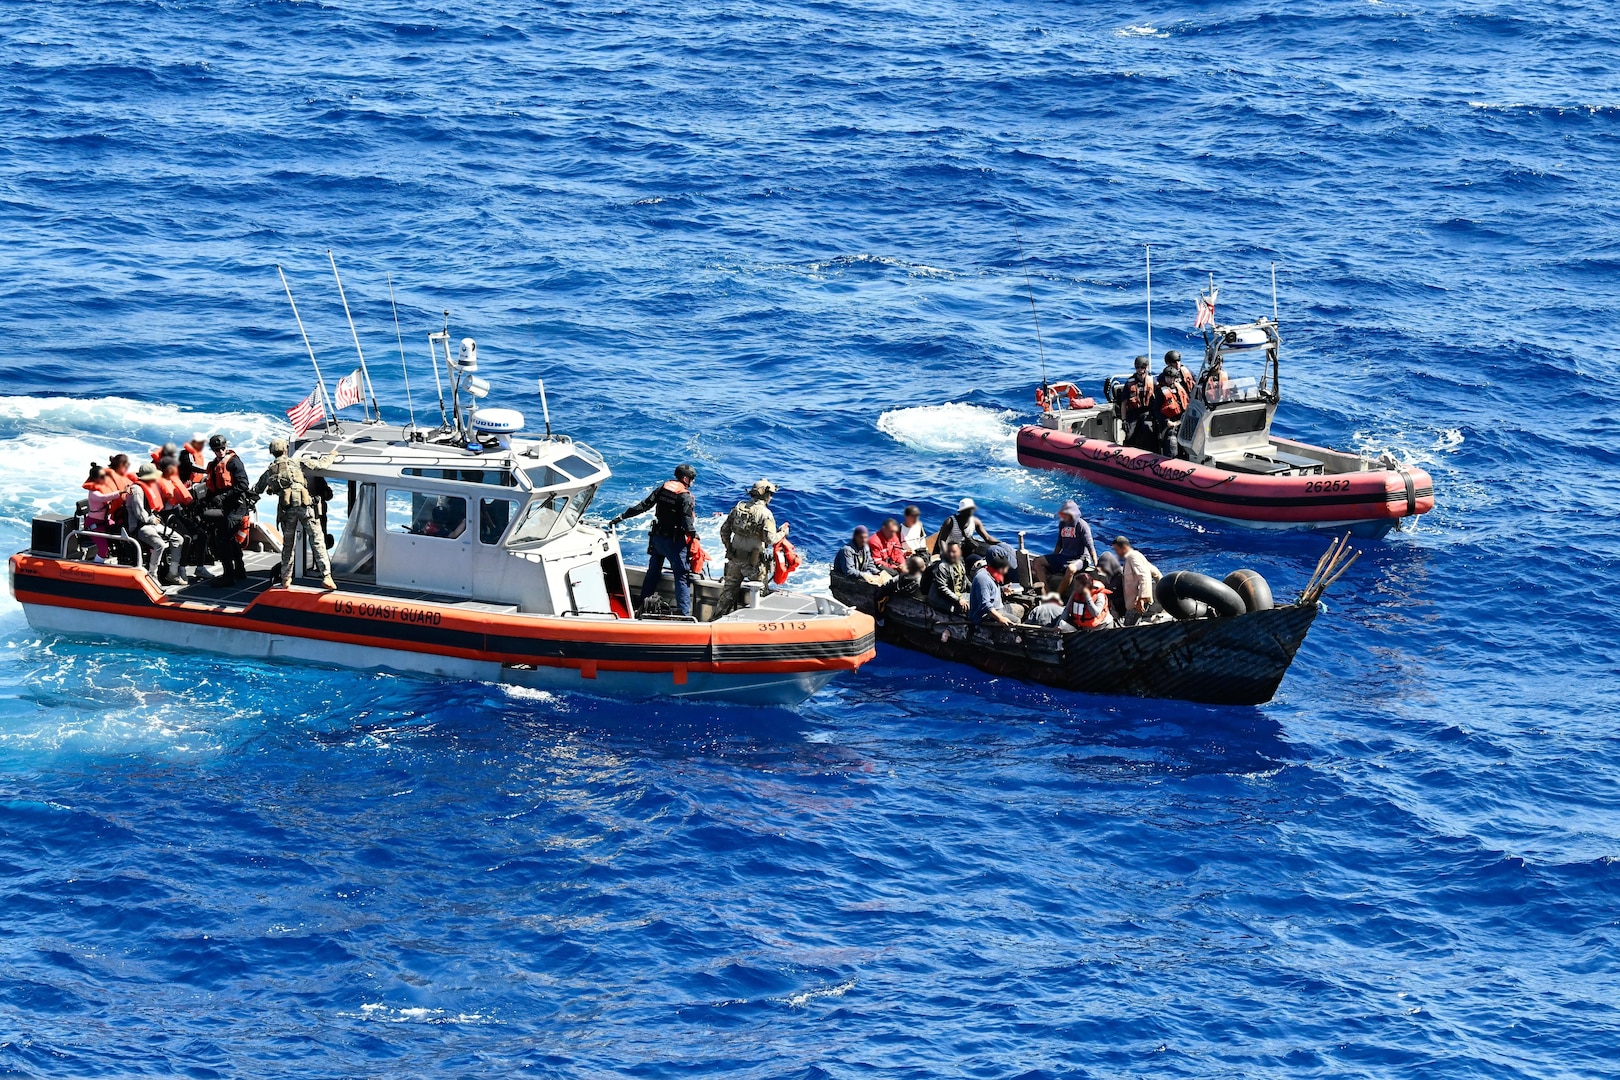 A Coast Guard Air Station Miami HC-144 Ocean Sentry airplane alerted Coast Guard Cutter James of a migrant vessel, at approximately 11:30 a.m., Feb. 20, 2023, about 25 miles south of Cardenas, Cuba. The people were repatriated on Feb. 23, 2023. (U.S. Coast Guard courtesy photo)